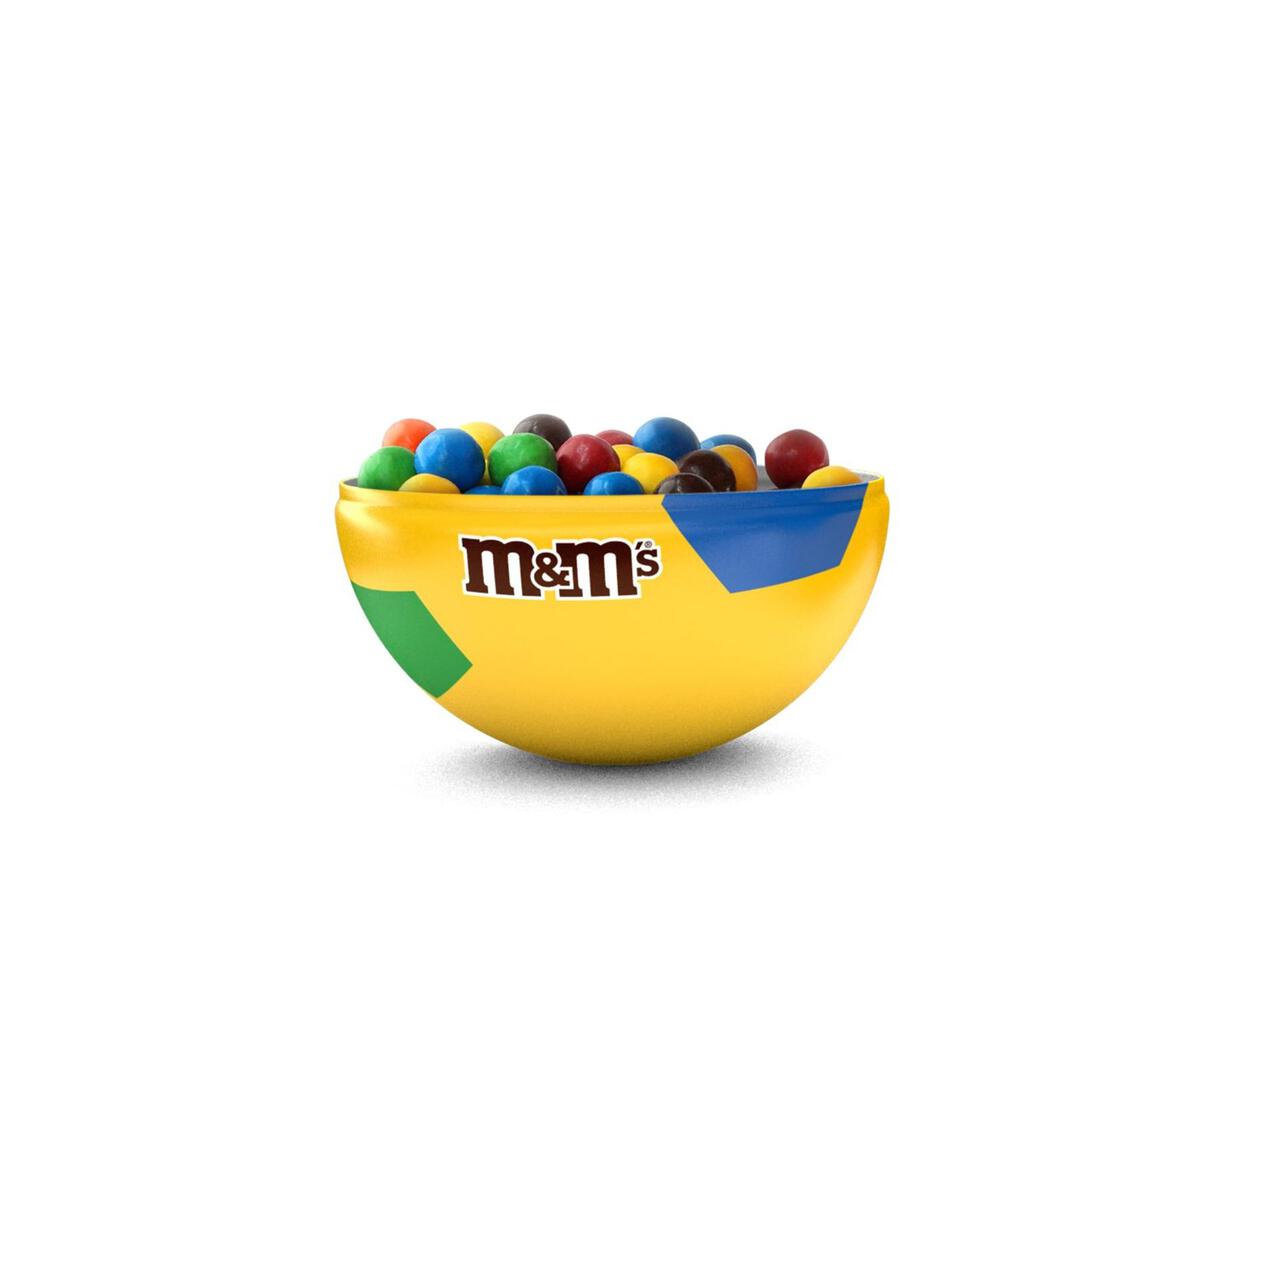 M&M Promotional Bowl Ball 0.75g